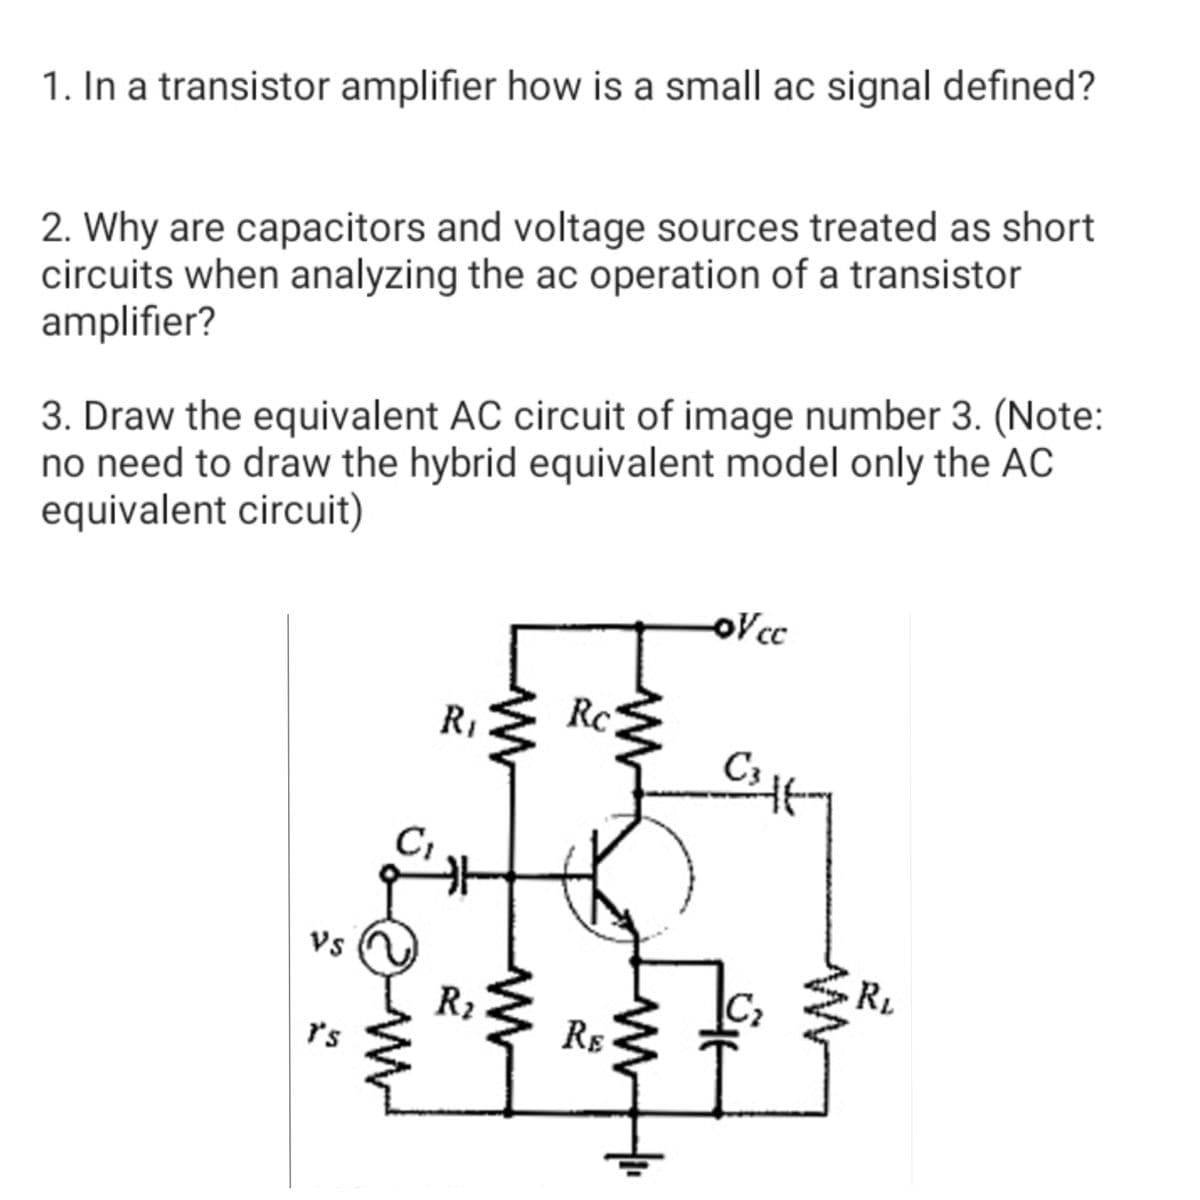 1. In a transistor amplifier how is a small ac signal defined?
2. Why are capacitors and voltage sources treated as short
circuits when analyzing the ac operation of a transistor
amplifier?
3. Draw the equivalent AC circuit of image number 3. (Note:
no need to draw the hybrid equivalent model only the AC
equivalent circuit)
oVc
R1
Rc
C3
Vs
RL
R2
C2
r's
RE
